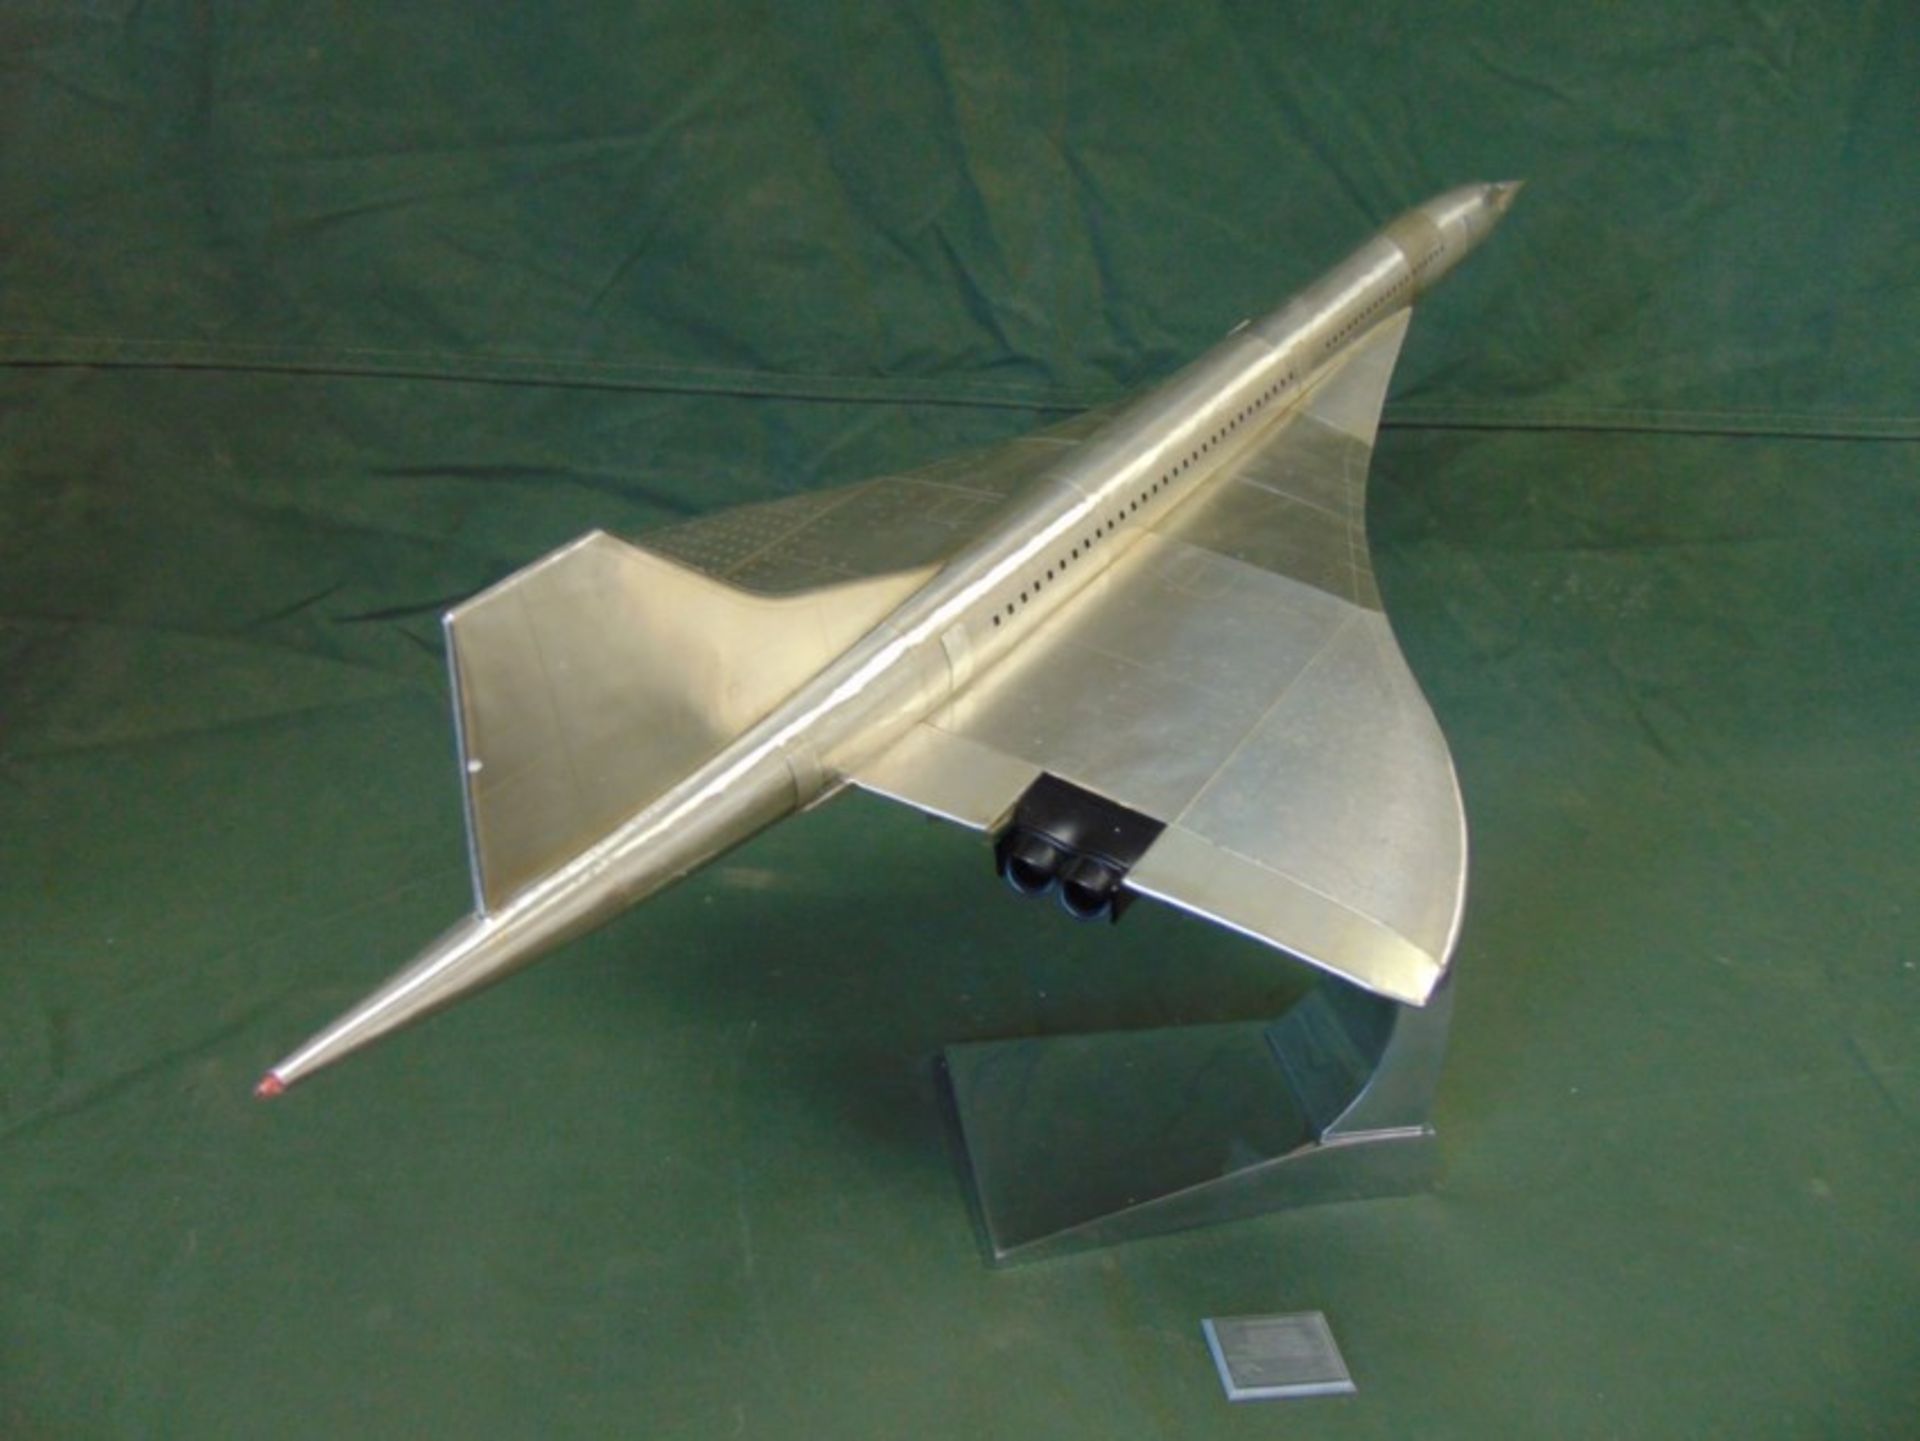 NEW JUST LANDED Large Aluminium Concorde Model - Image 3 of 14